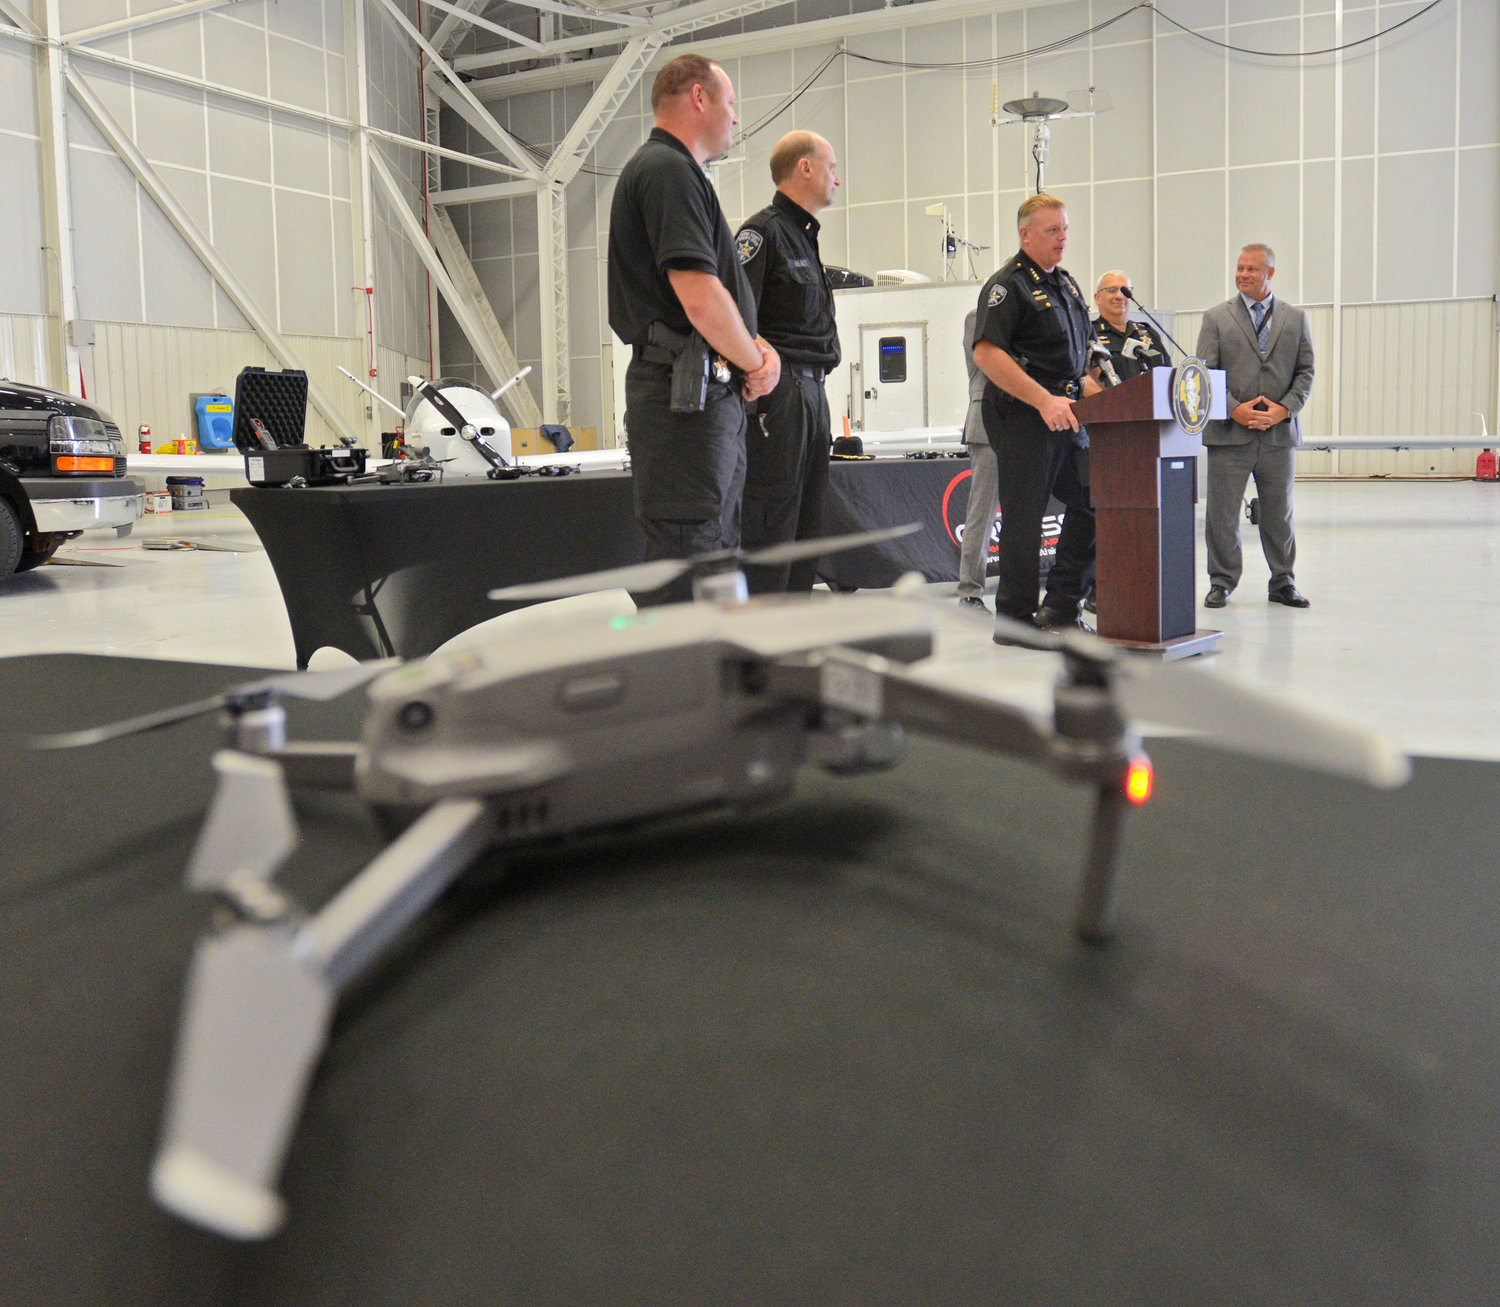 NEW DRONE UNIT — Sheriff Robert M. Maciol announced the creation of a new Unmanned Aircraft Systems Unit for the Sheriff’s Office this morning at the Griffiss International Airport.